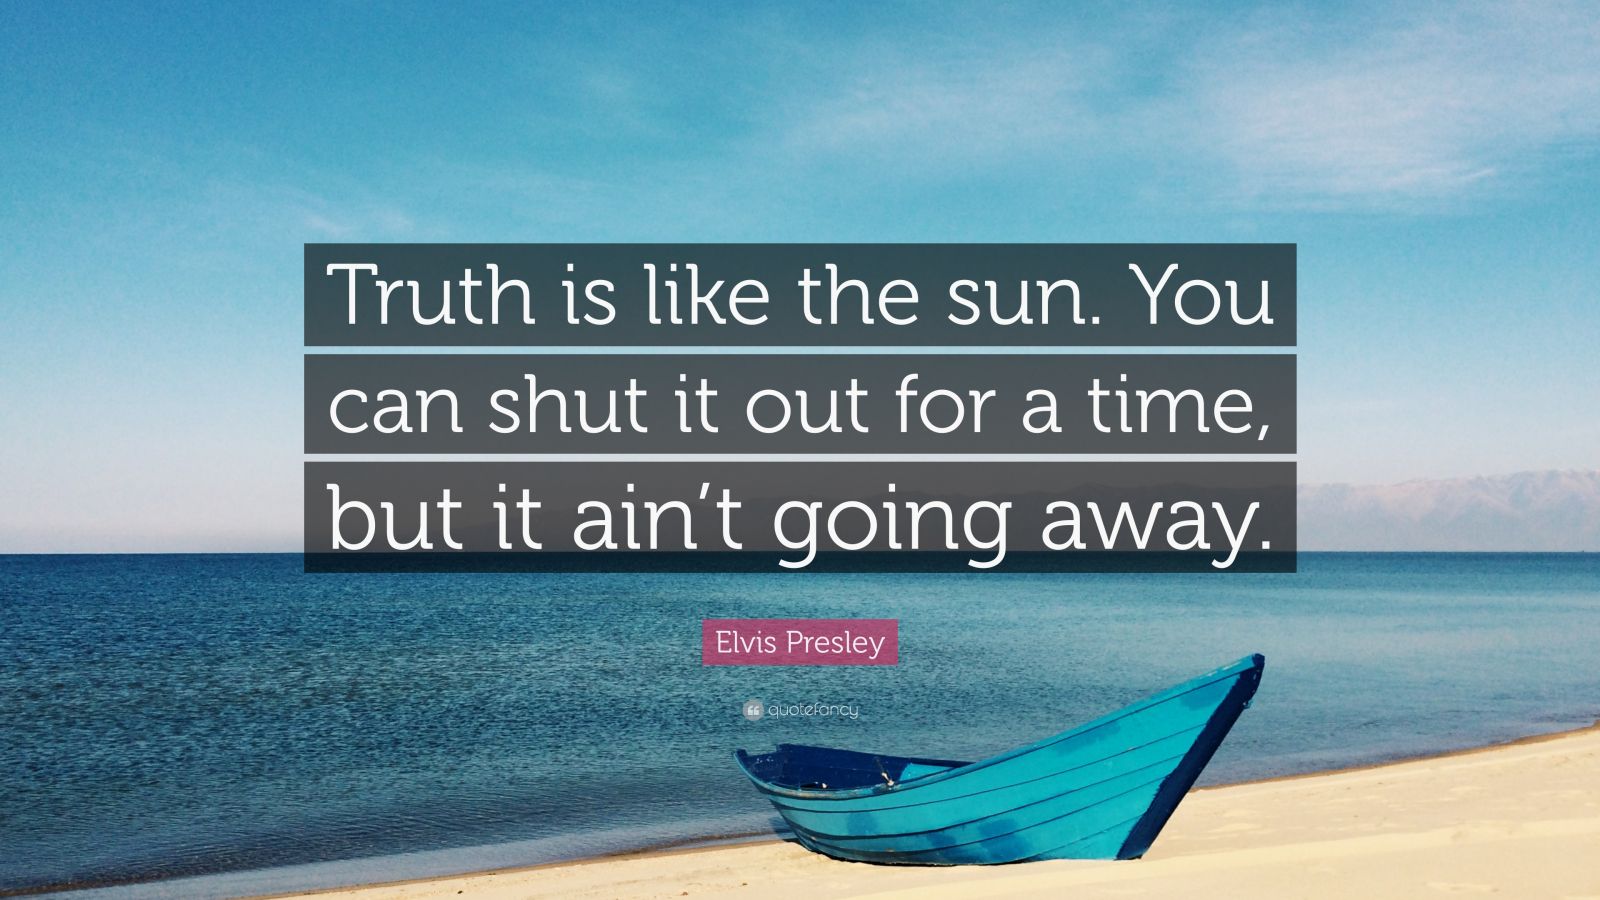 Elvis Presley Quote: "Truth is like the sun. You can shut ...